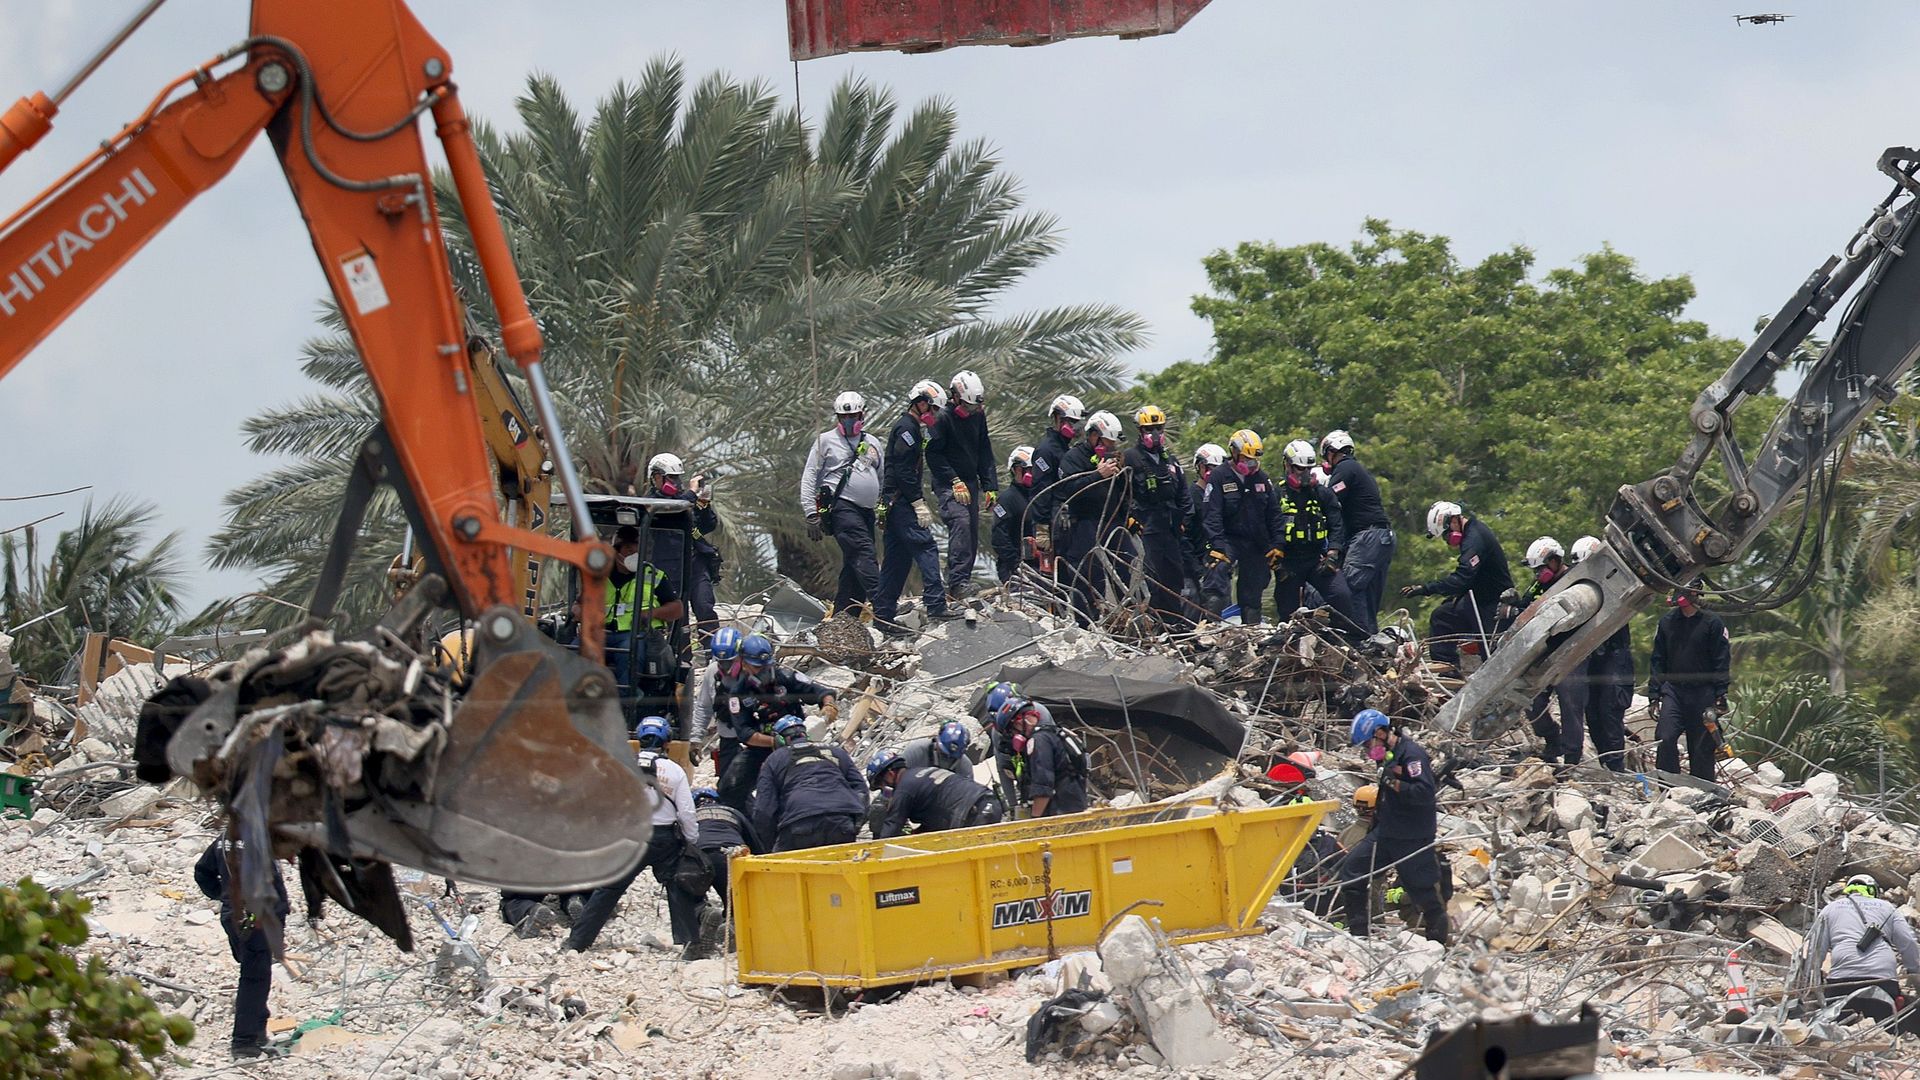 Machinery is used to delicately search the rubble at the site of the building collapse in Surfside, Florida.